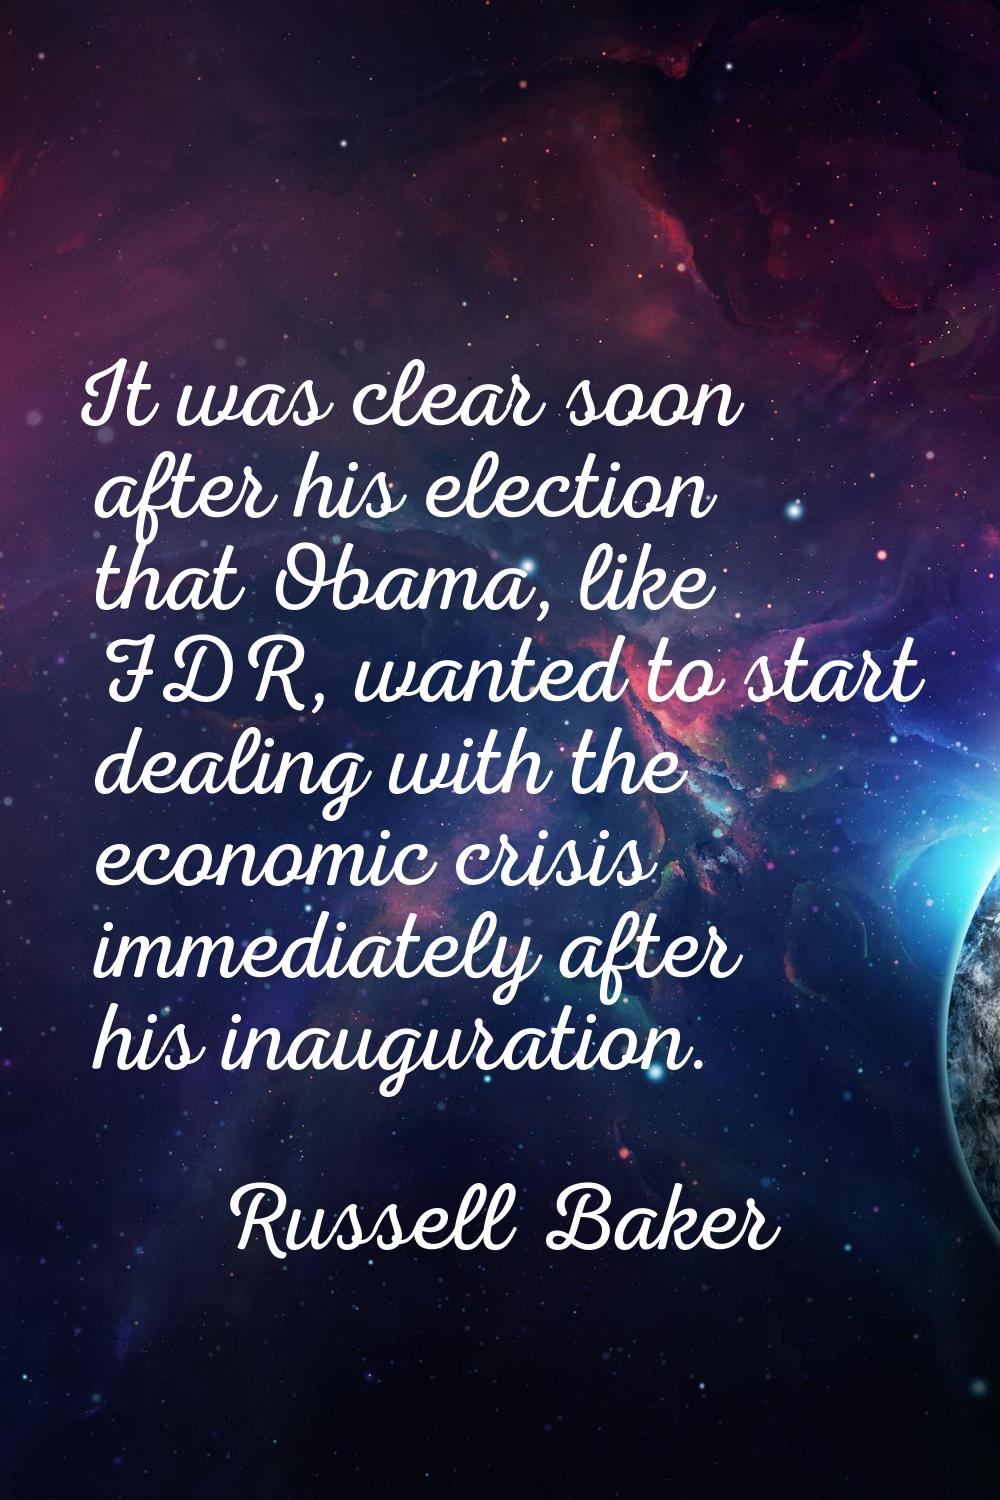 It was clear soon after his election that Obama, like FDR, wanted to start dealing with the economi